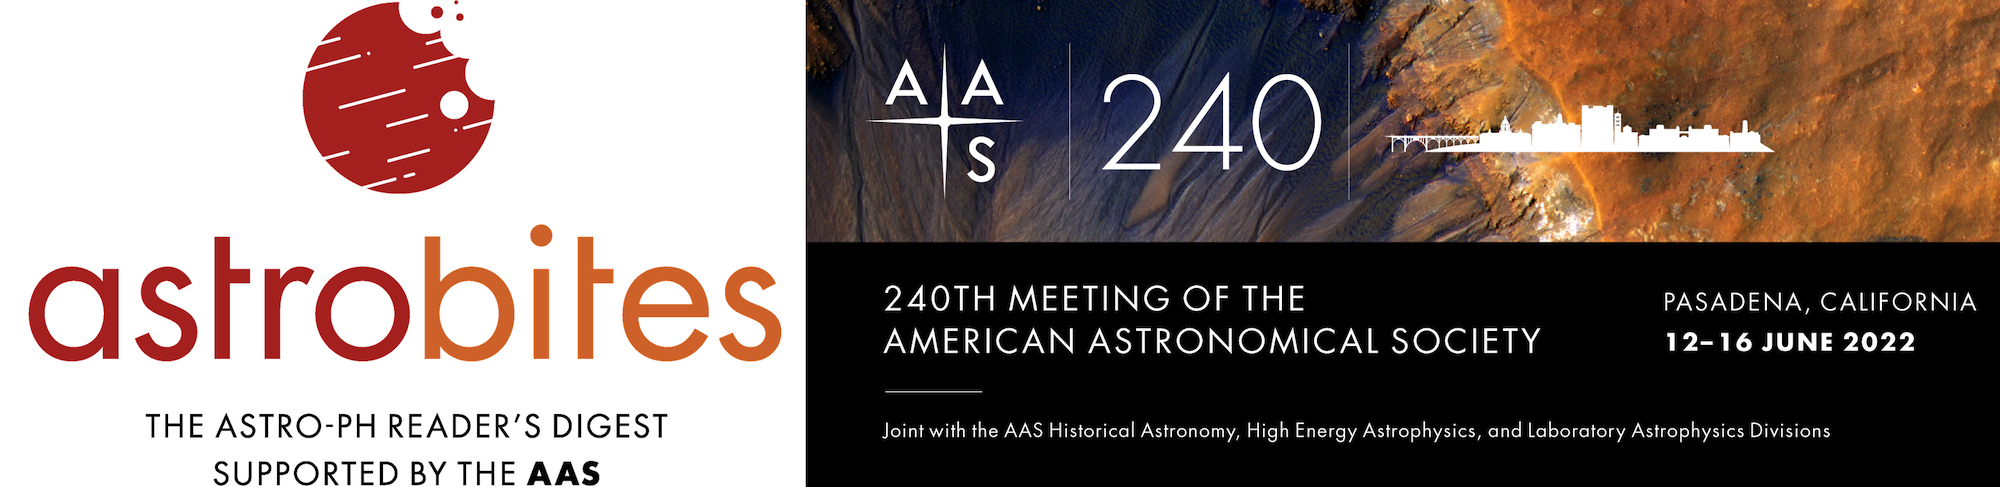 Astrobites logo and AAS 240 banner